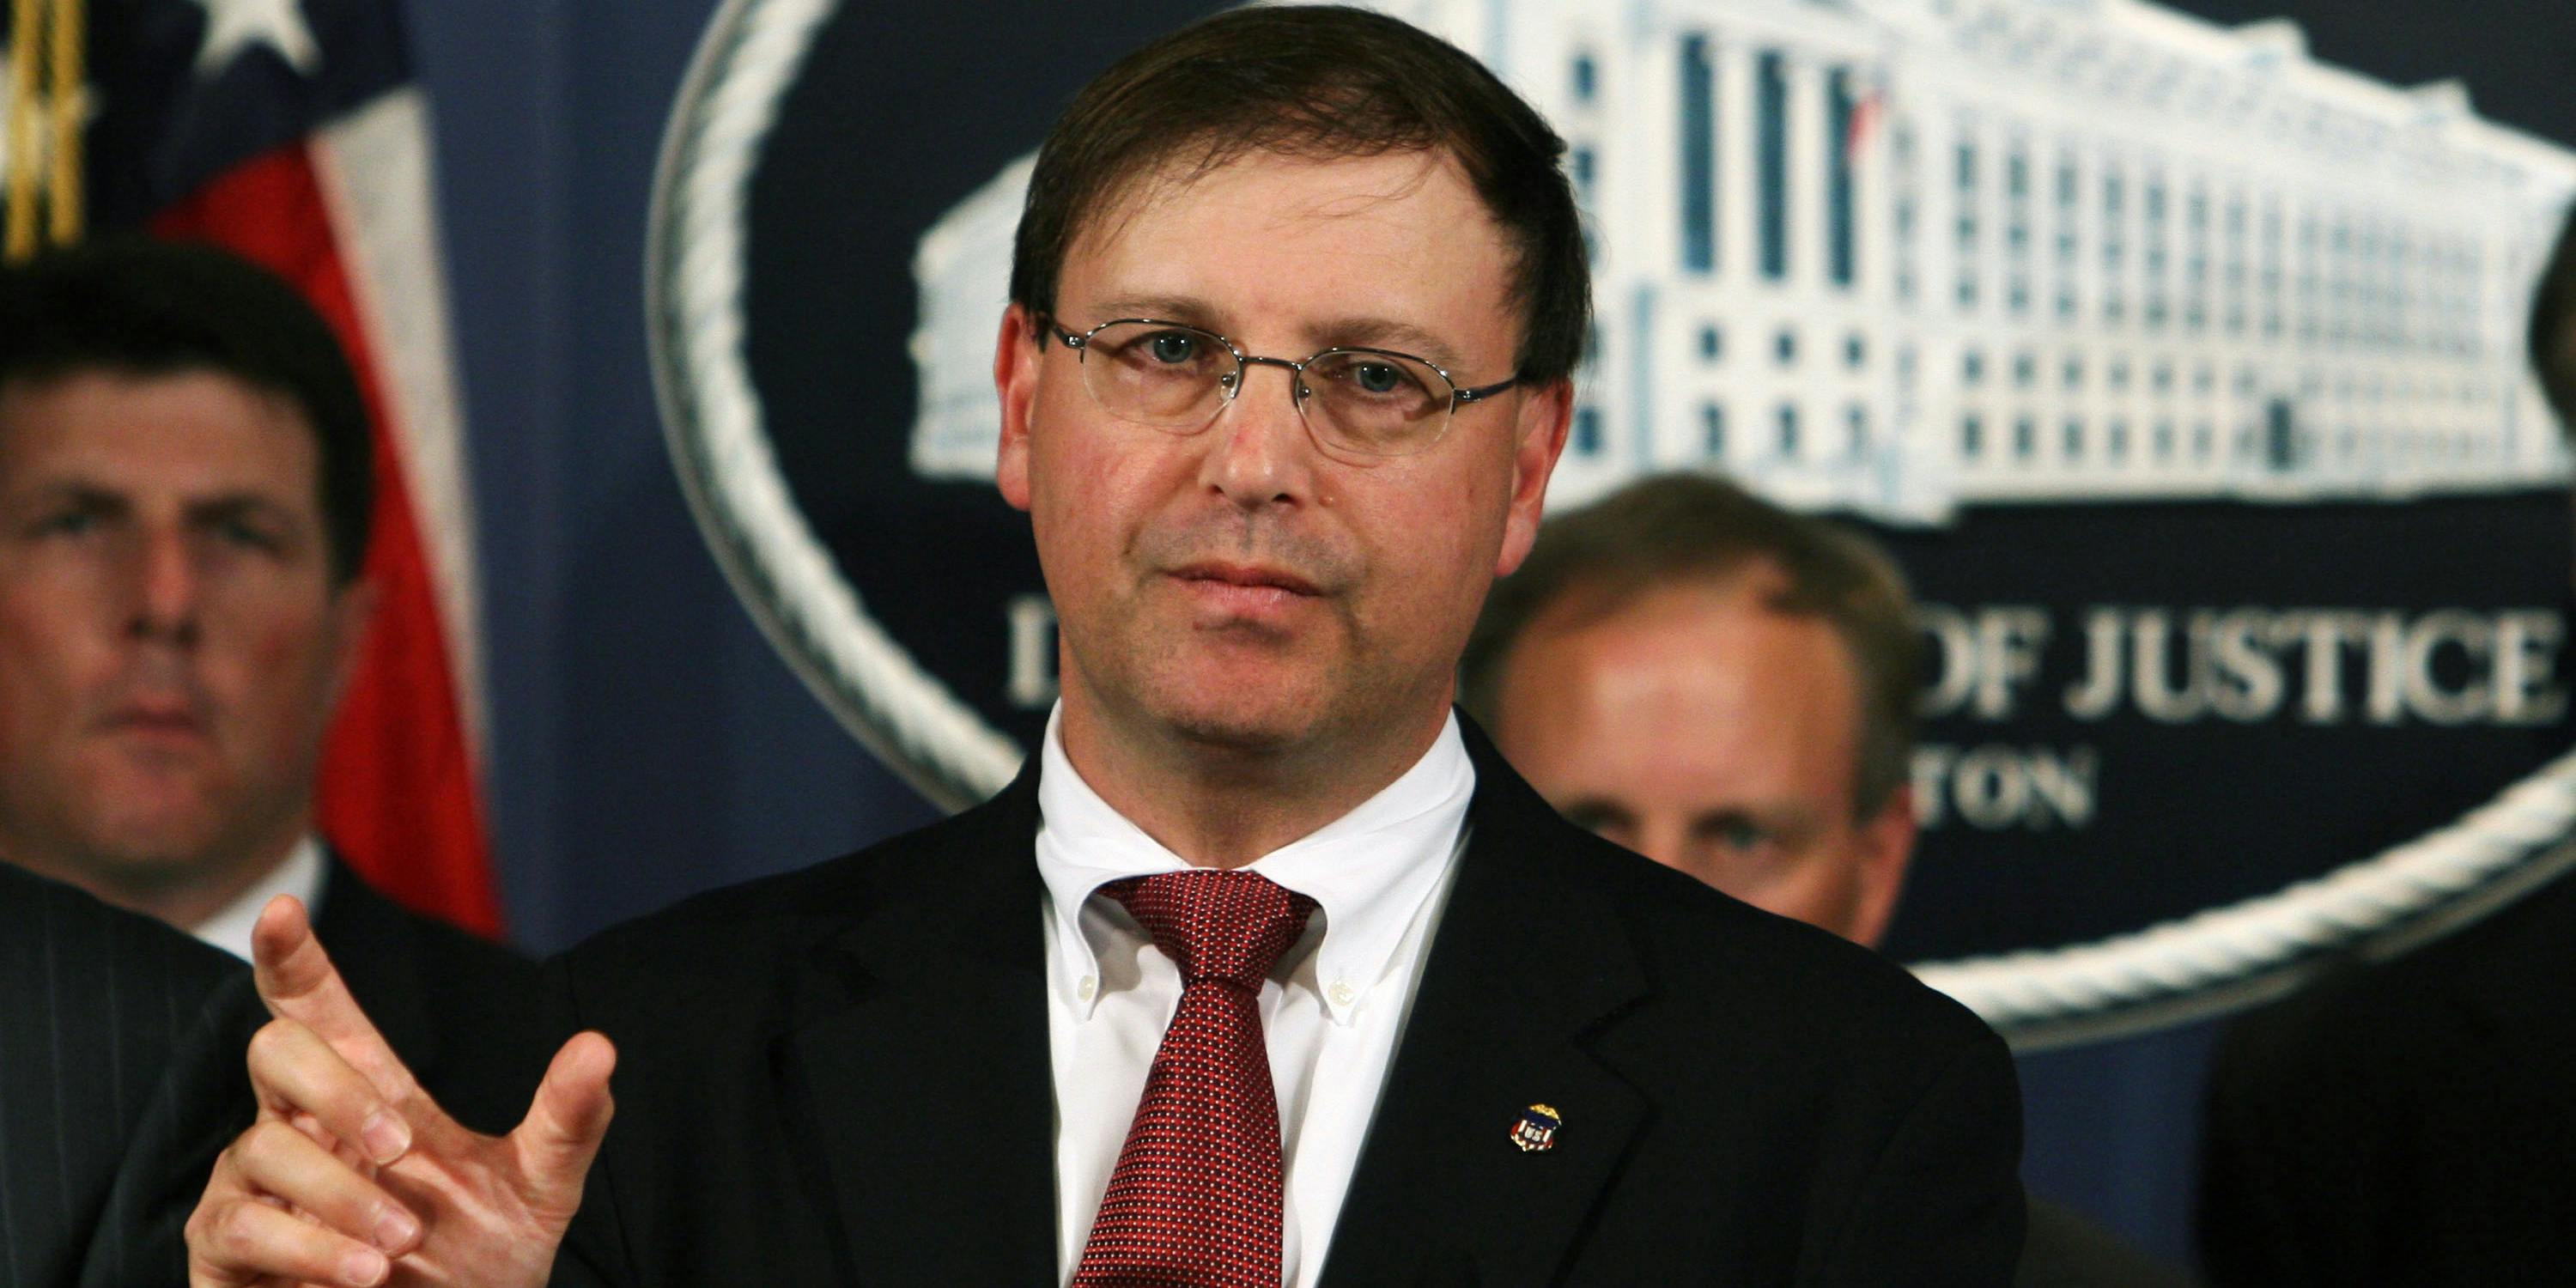 UNITED STATES - JUNE 04: Director of the DEA Chuck Rosenberg, then a US Attorney General of the Eastern District of Virginia, speaking at a news conference at the Department of Justice in Washington, D.C., June 4, 2007. Experts remain uncertain about whether the DEA will reclassify Epidiolex or CBD itself following FDA approval of Epidiolex for epilepsy on Monday, June 25. (Photo by Chris Kleponis/Bloomberg via Getty Images)